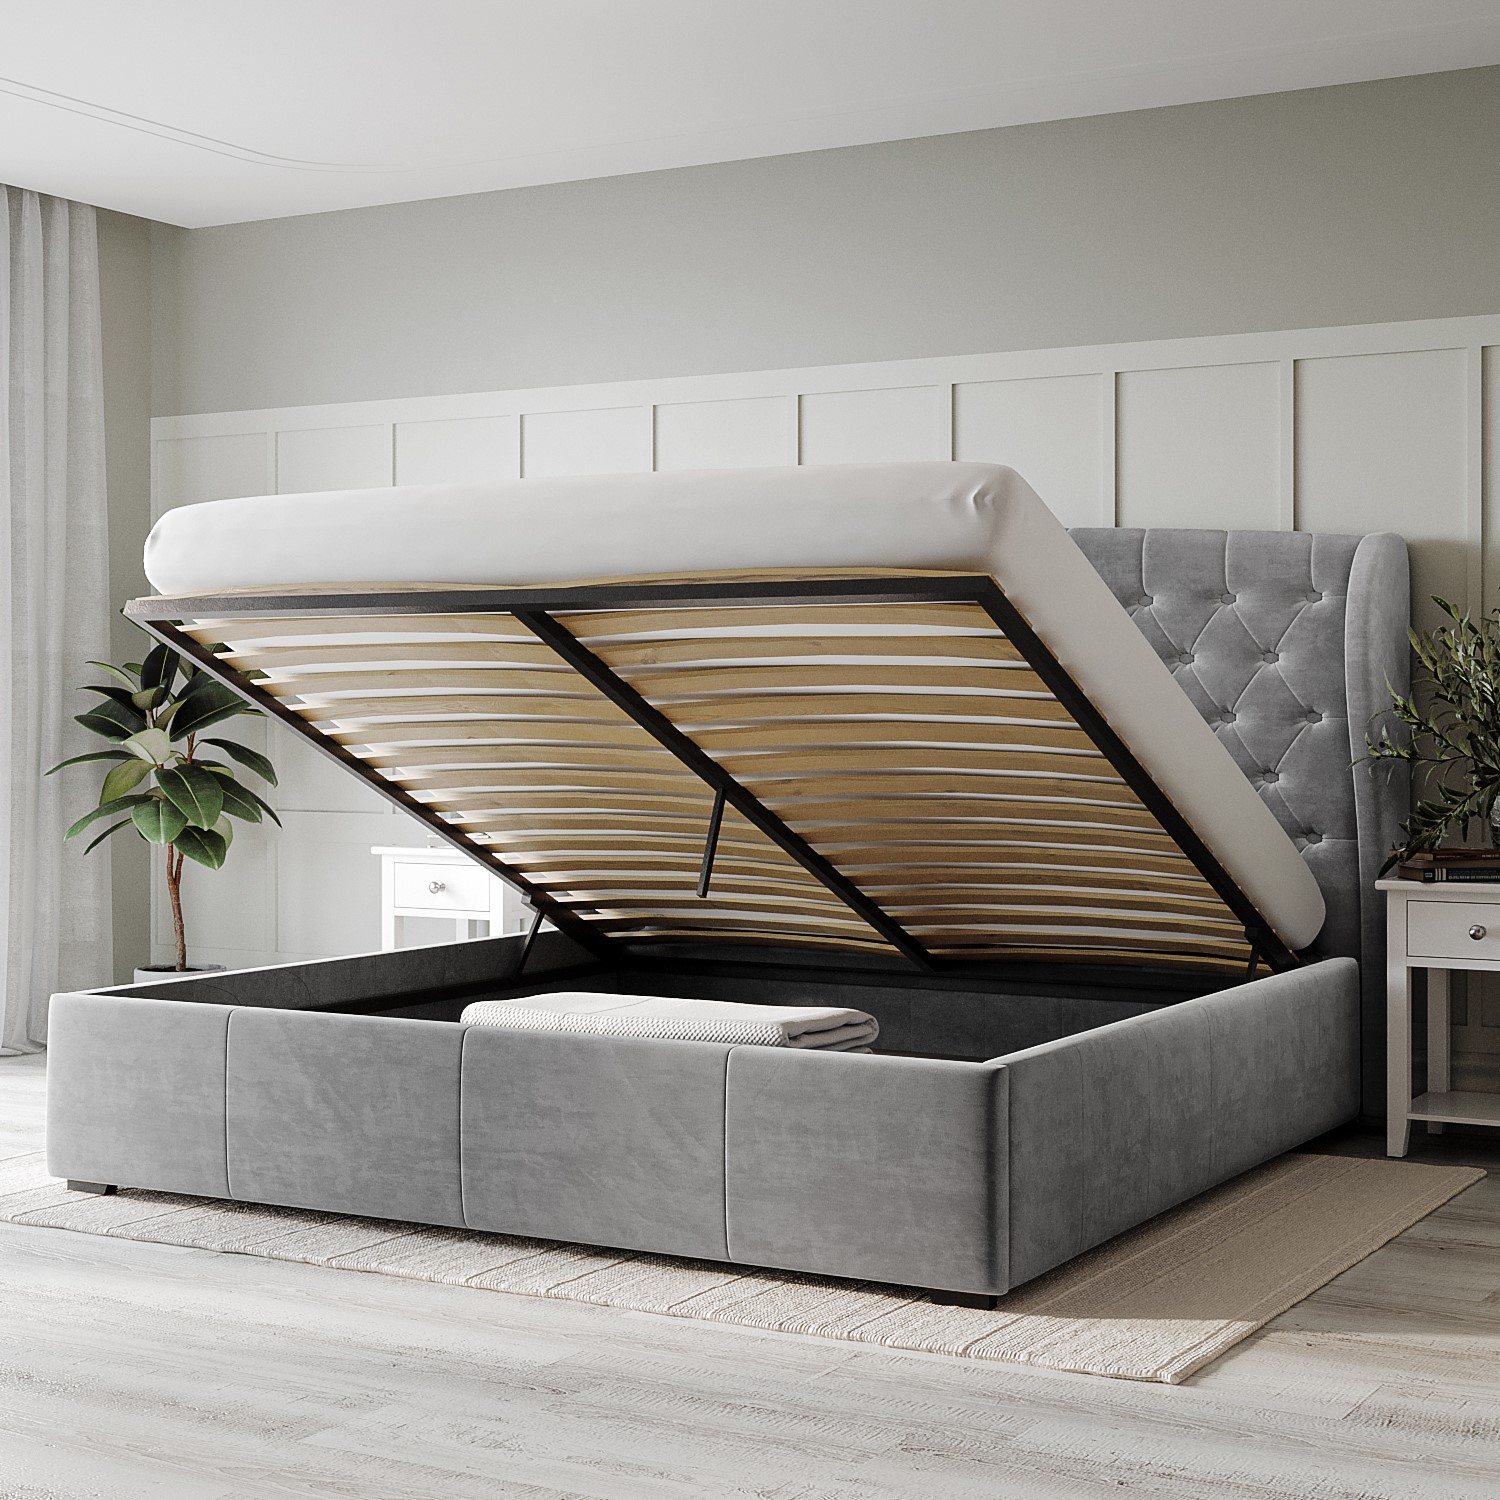 Read more about Grey velvet super king ottoman bed with winged headboard safina